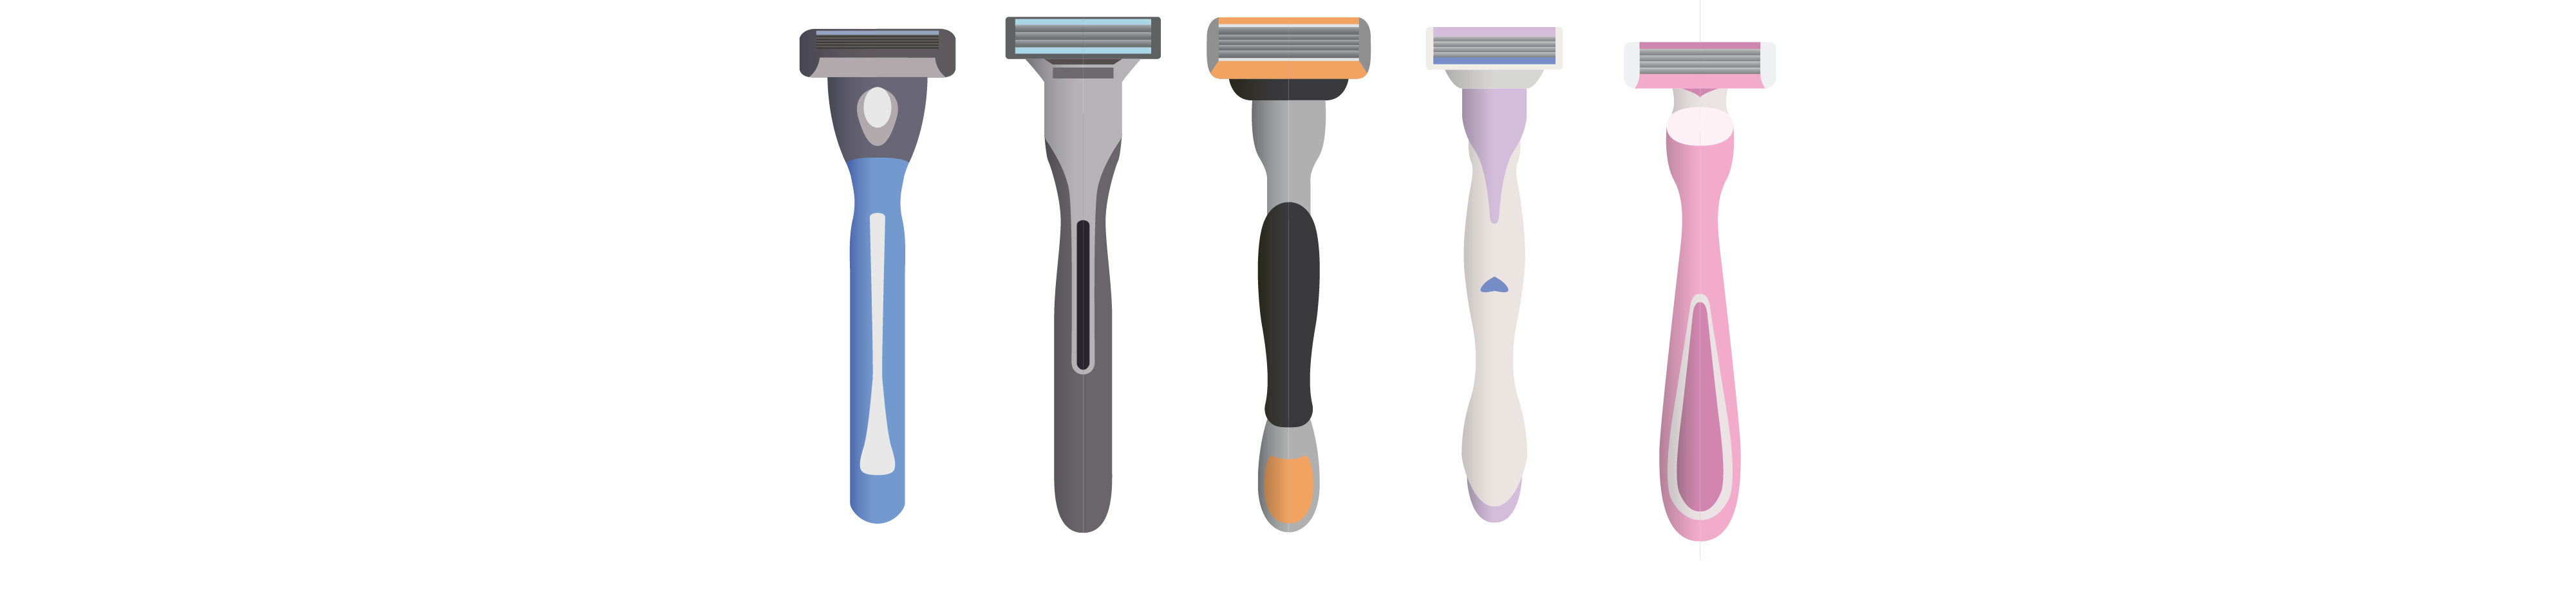 5 razors are lined up, each with different colours and form. From left to right, the first razor is blue and grey with a simple, slim and straight design. The second razor is various shades of grey, with a form that goes from thicker at the top to thinner at the bottom in a downward triangular shape. The third razor is varying shades of grey with orange accents. Darker, bulky components show where the user is meant to interact with and grip the product. The fourth razor is white and light purple, with a curvier form. The fifth razor is varying shades of pink and white with an hourglass shape.